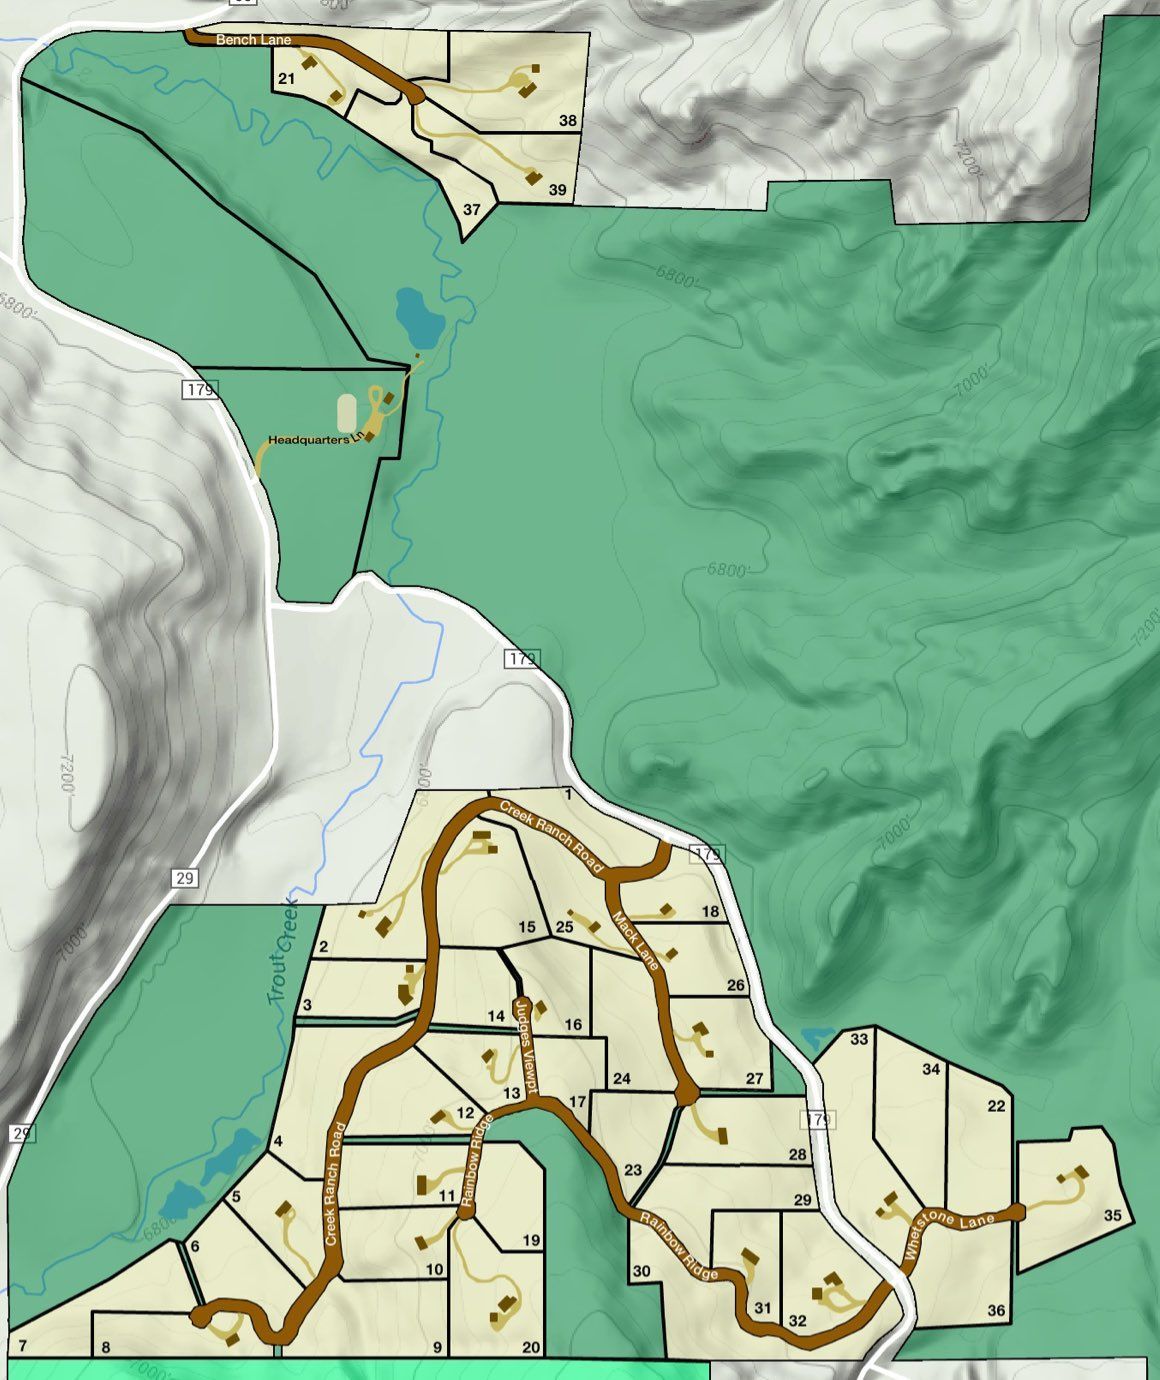 A map of a residential area with a green border